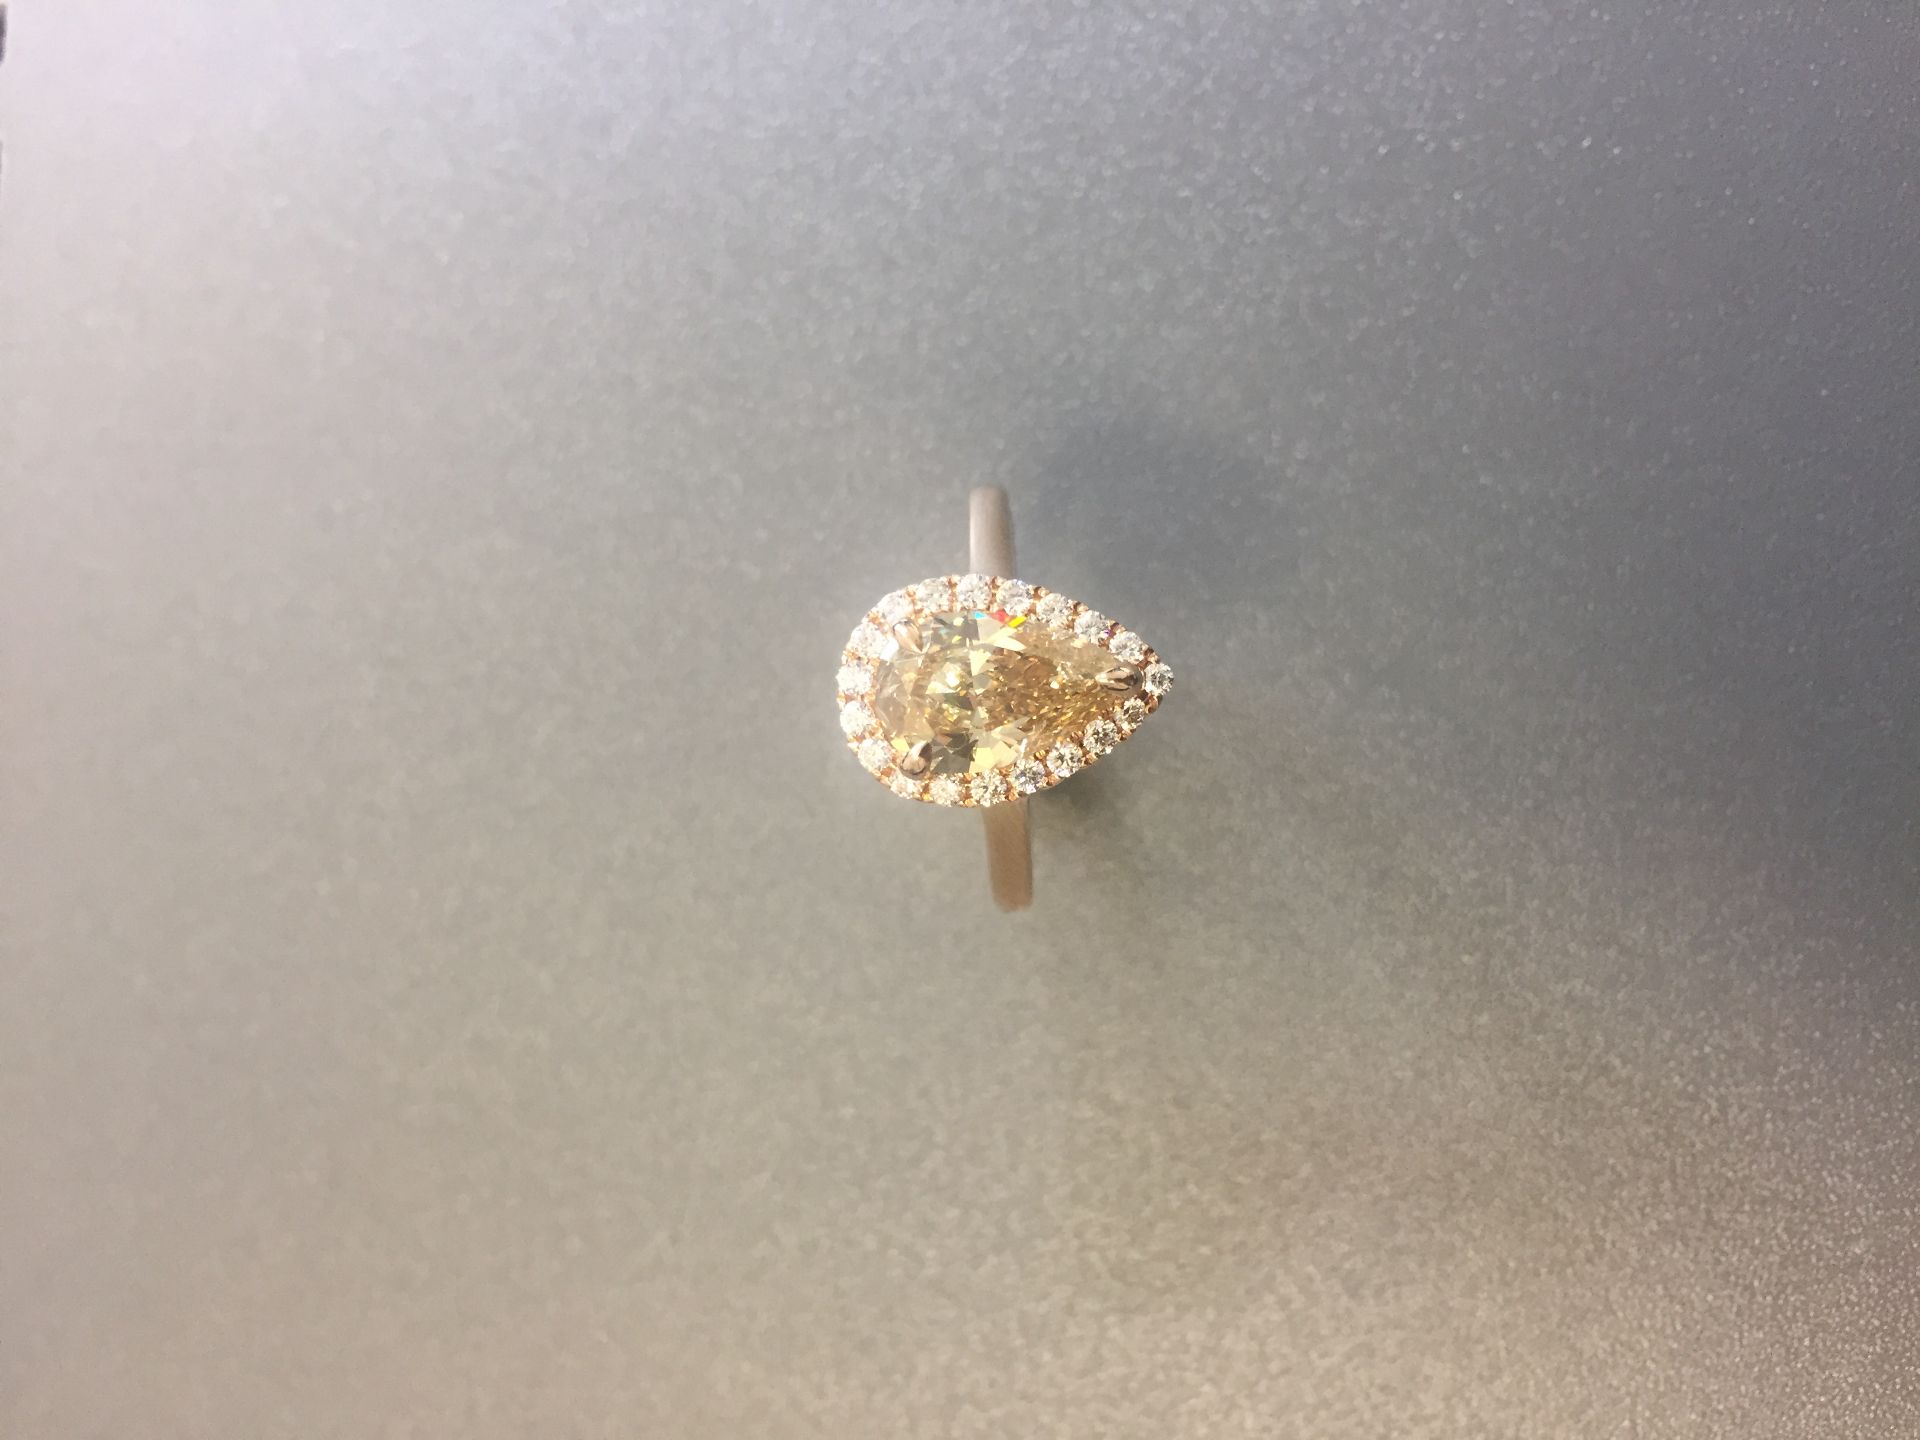 1.47ct pear shaped diamond set ring. Fancy yellow pear diamond, I1 clarity. Set in 18ct rose gold. - Image 2 of 6